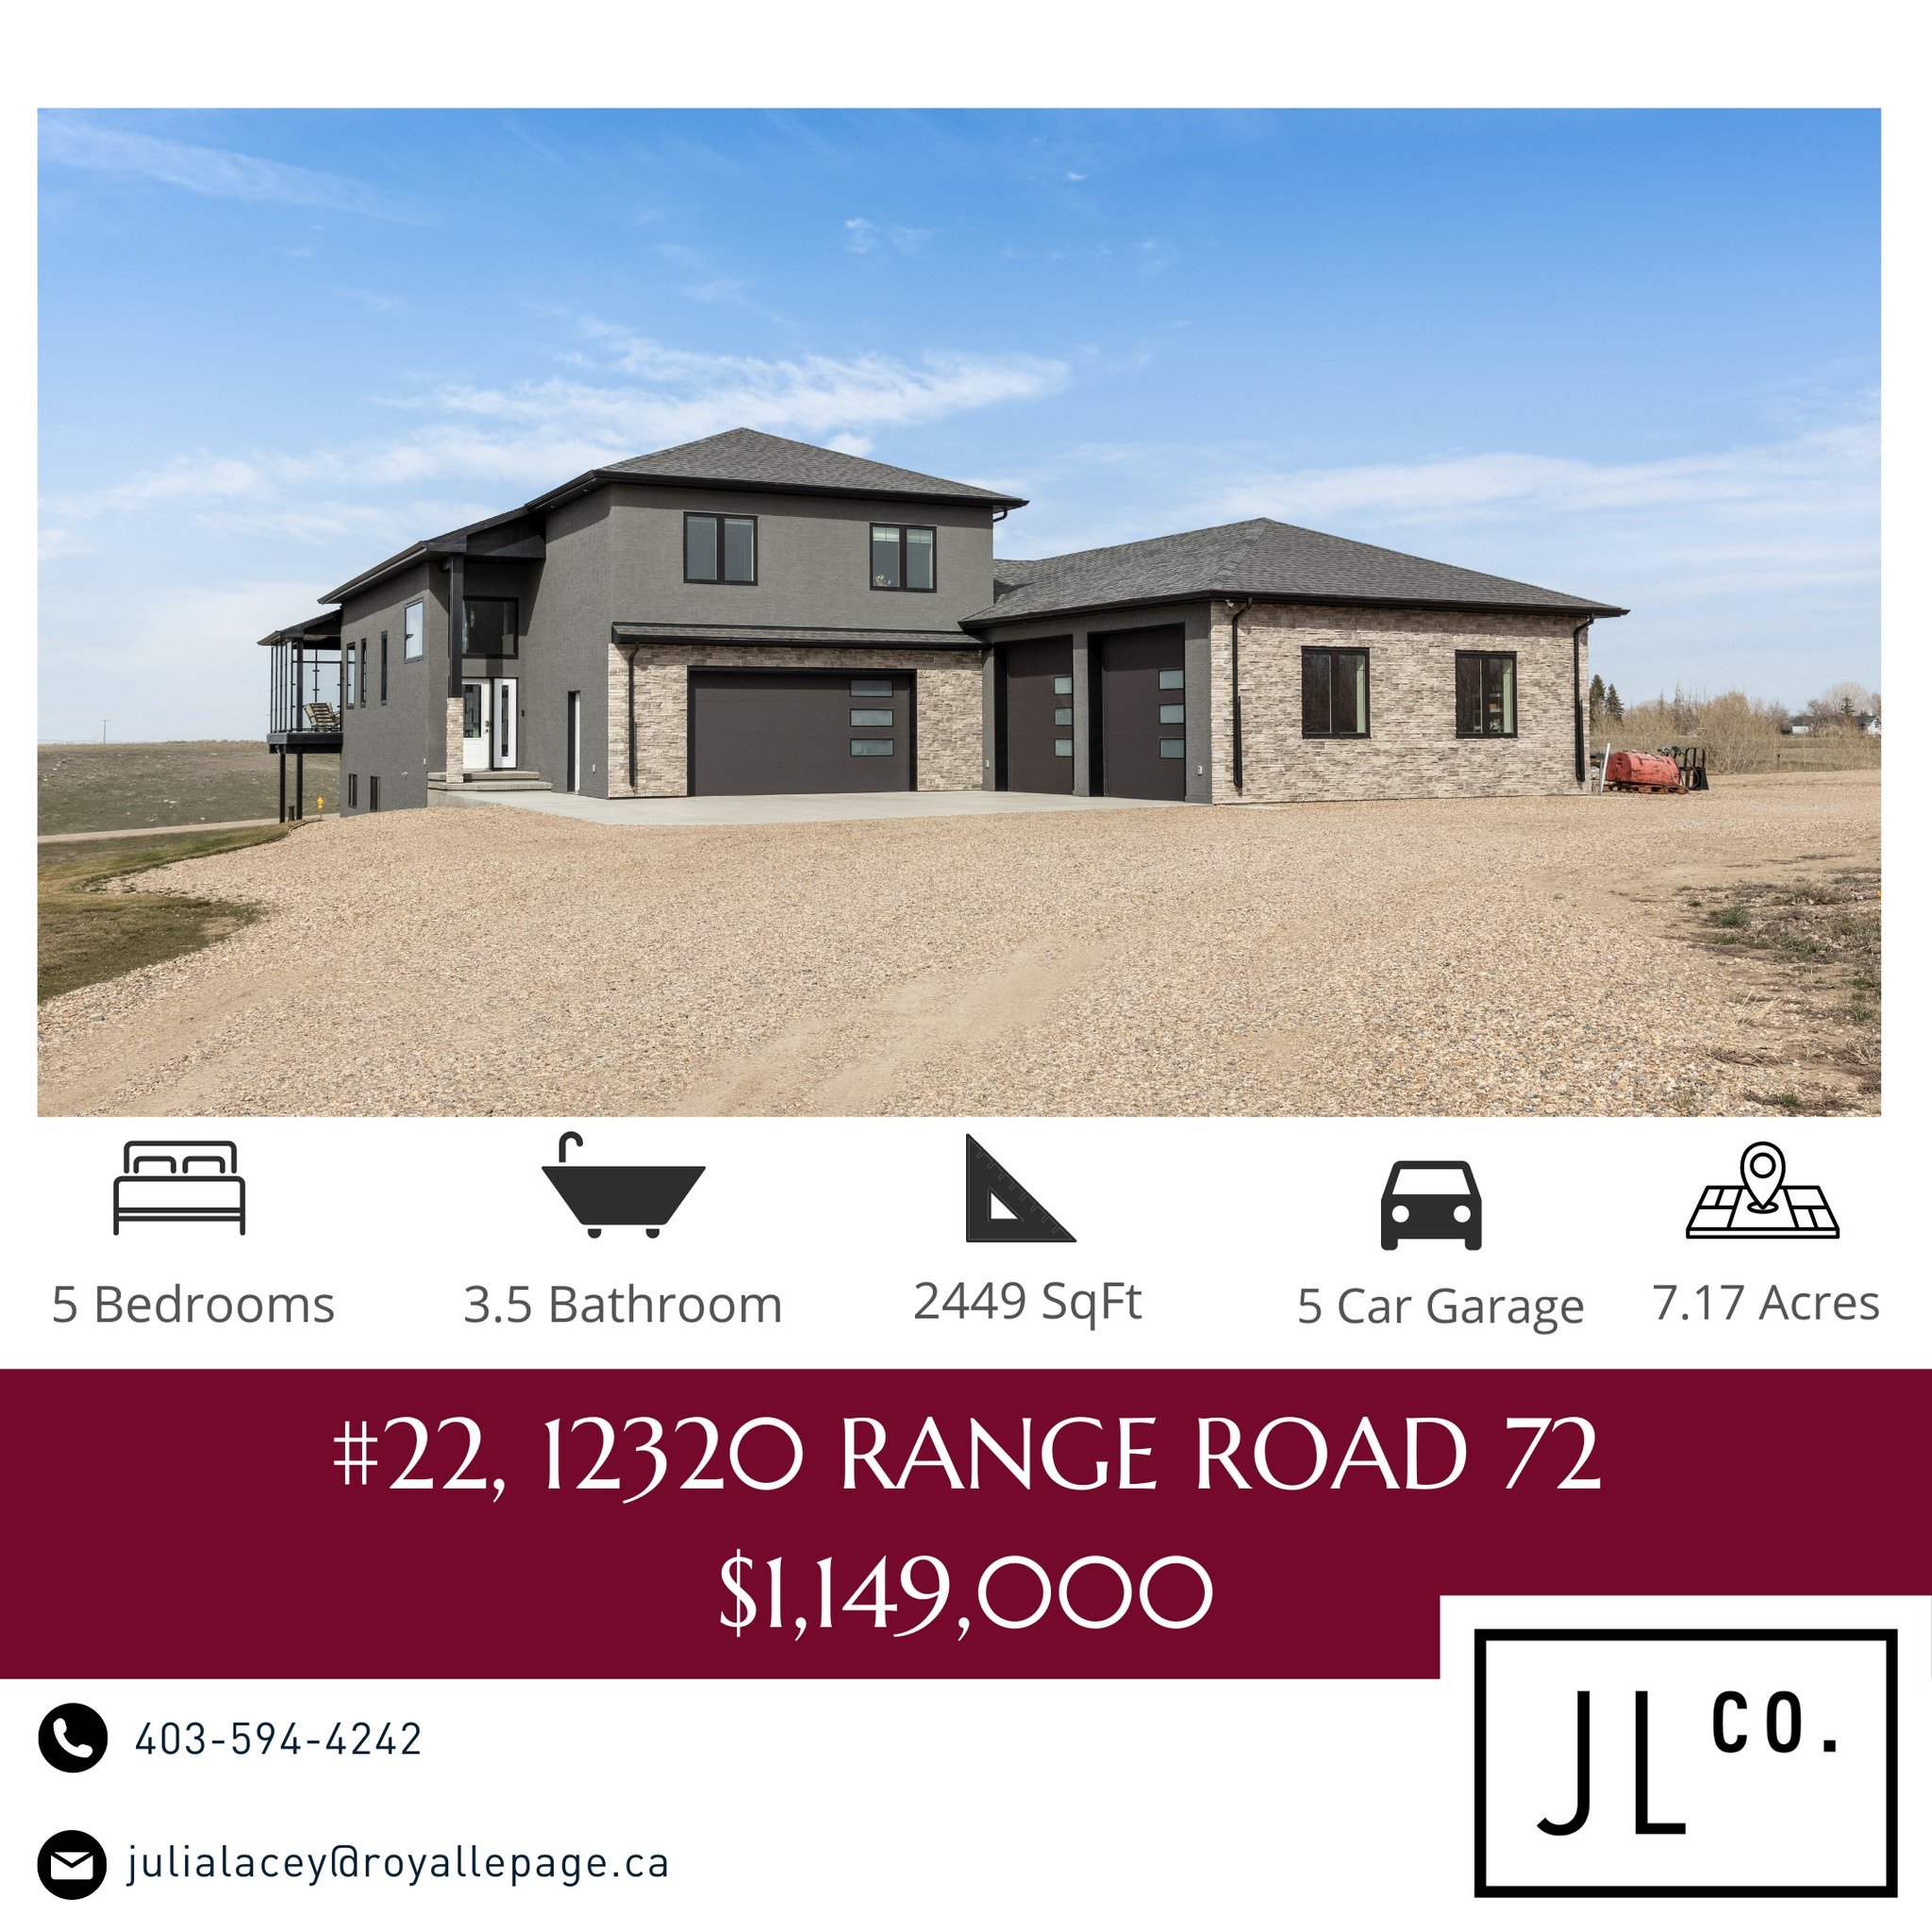 🏡 Nestled in West Ridge Country Estates, just minutes from Medicine Hat, discover this stunning 7.14-acre retreat!

✨ 2449 SqFt Modified Bi-level
🛏️ 5 beds, 🛁 3.5 baths
🚗 2392 SqFt attached 5-car garage
🏞️ 18&rsquo; vaulted ceilings
🍳 Gourmet k